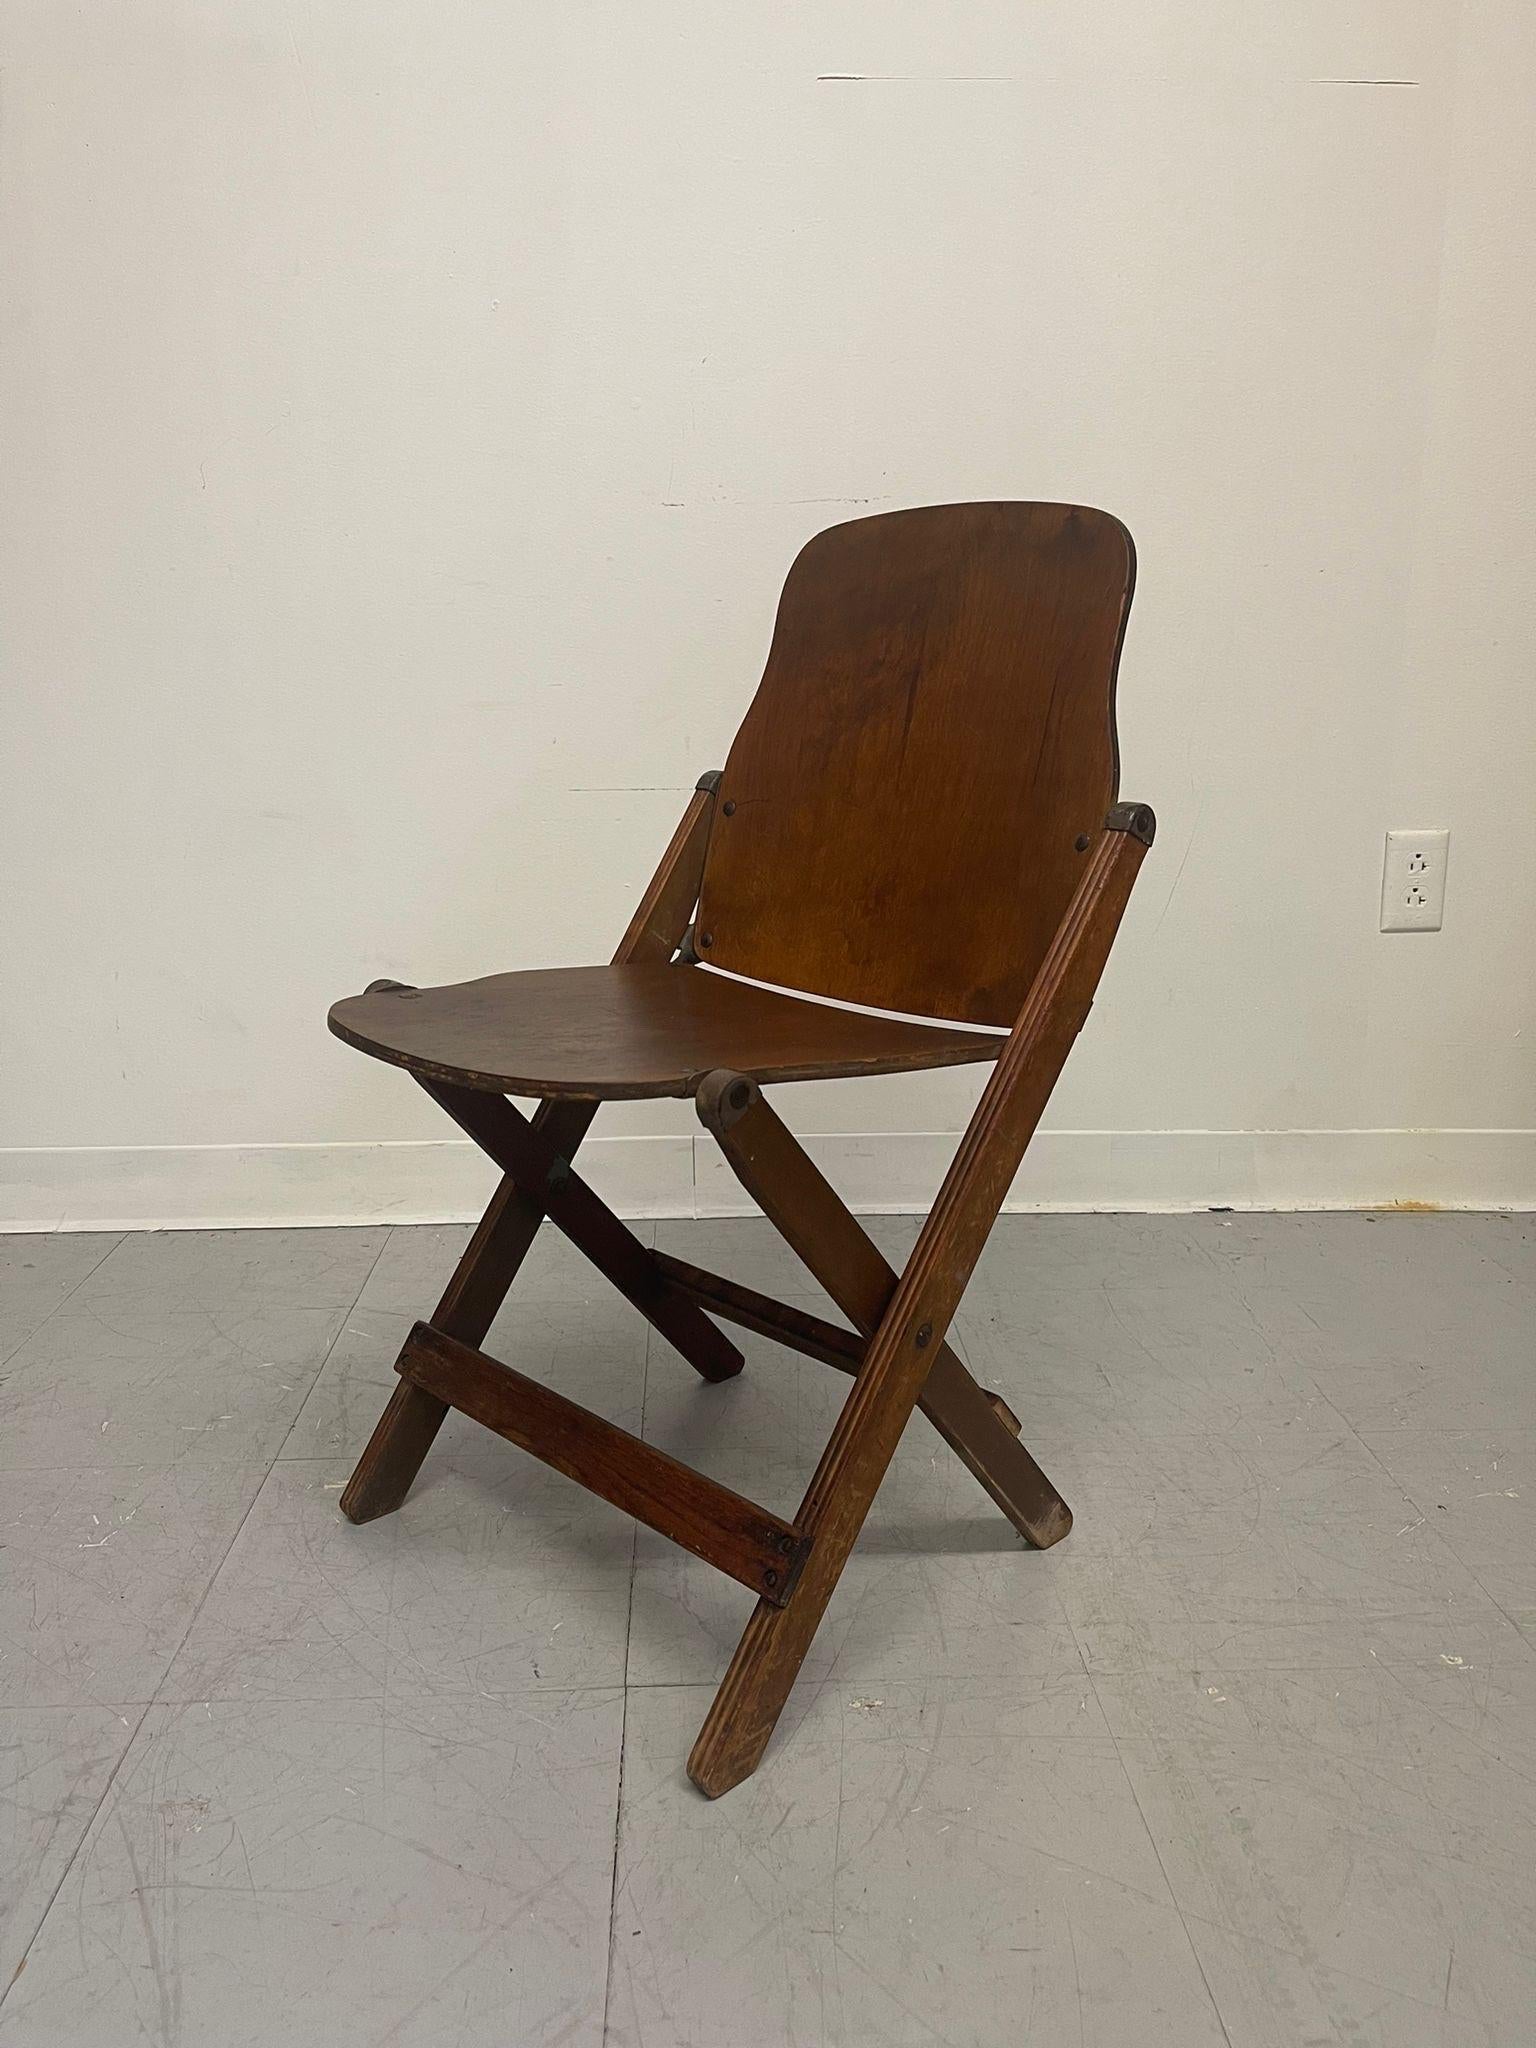 Vintage Wooden Folding. American Seating Company on the Seat as Pictured.Slight Chipping on the Back. Vintage Condition Consistent with Age as Pictured.

Dimensions. 21 W ; 17 D ; 30!H